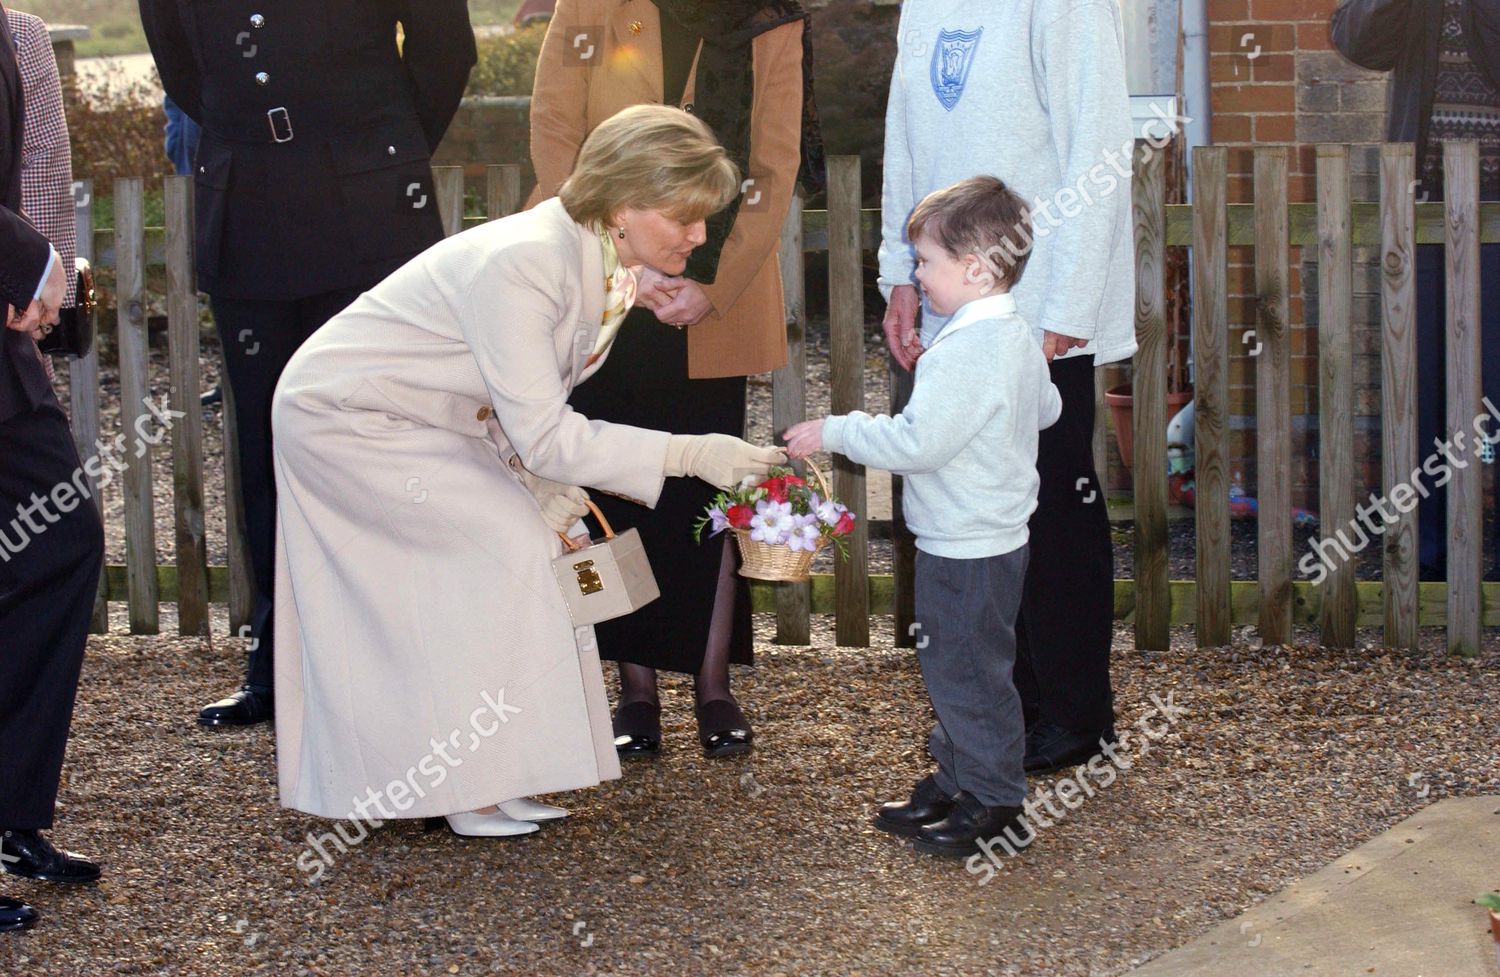 sophie-countess-of-wessex-opening-an-new-extention-of-the-montessori-nursery-oddfellows-hall-norfolk-britain-shutterstock-editorial-375057a.jpg